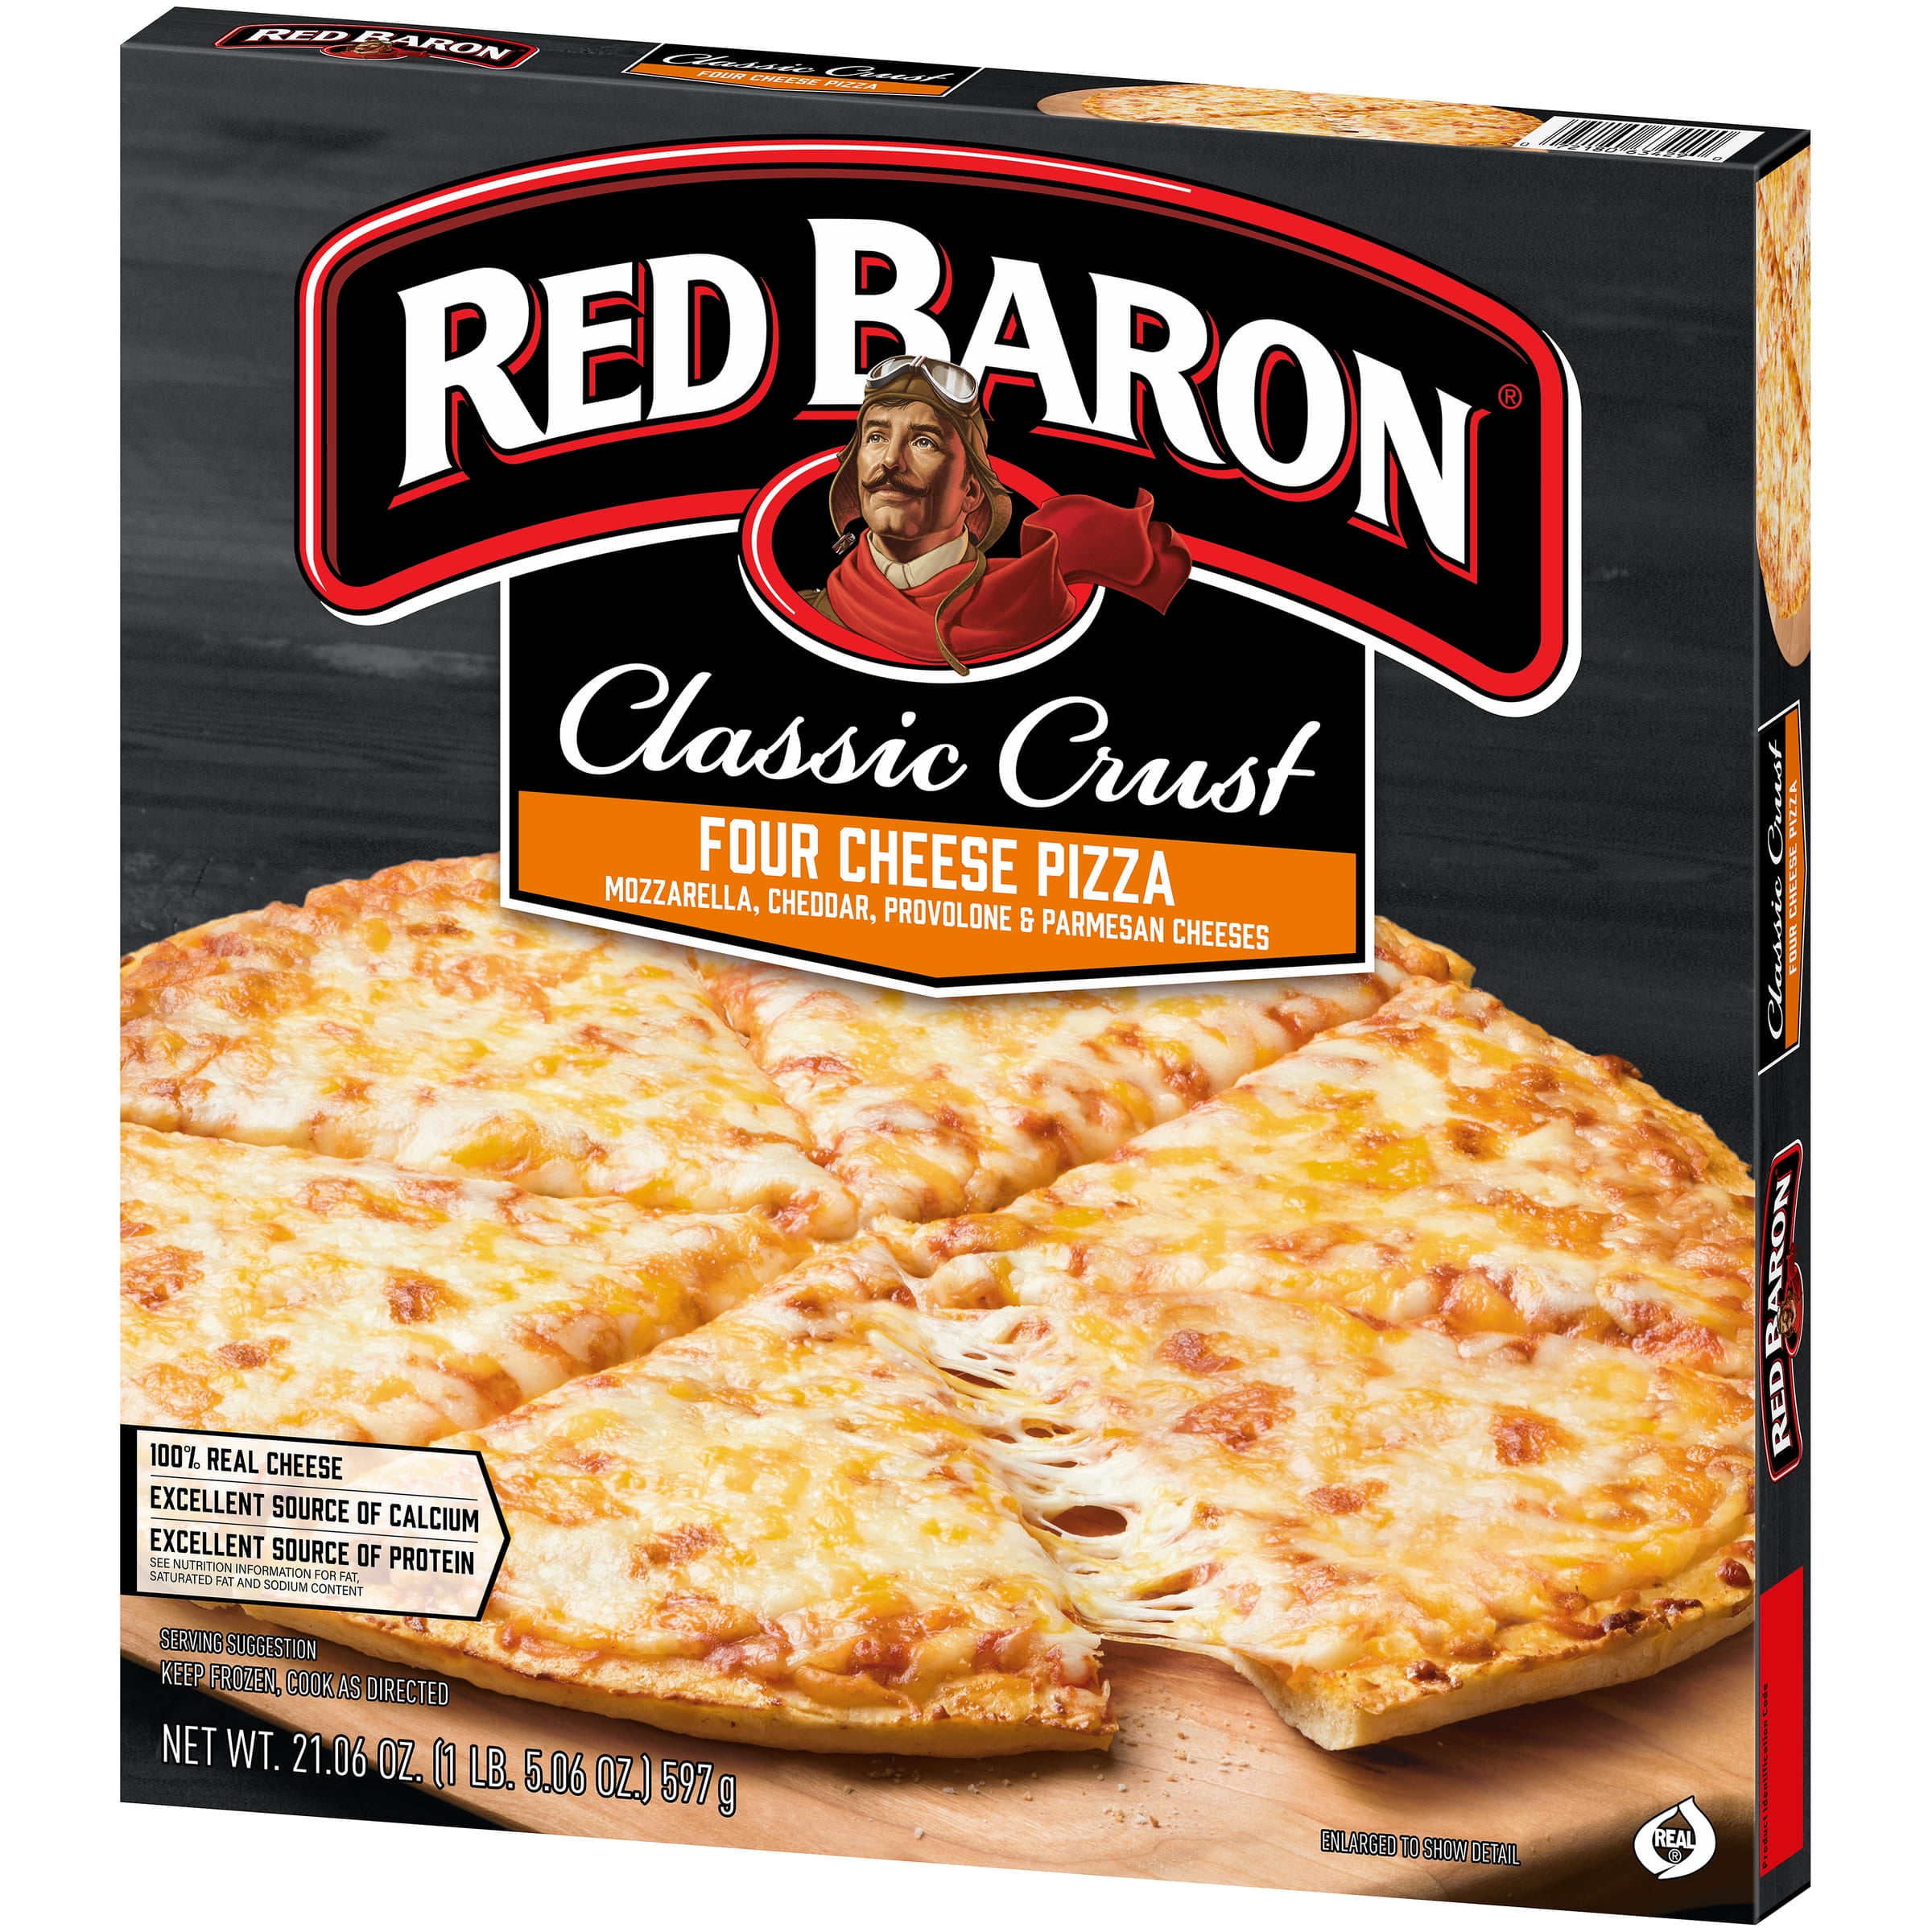 Red Baron Frozen Pizza Classic Crust 4-Cheese, 12 in., 21.06 Oz